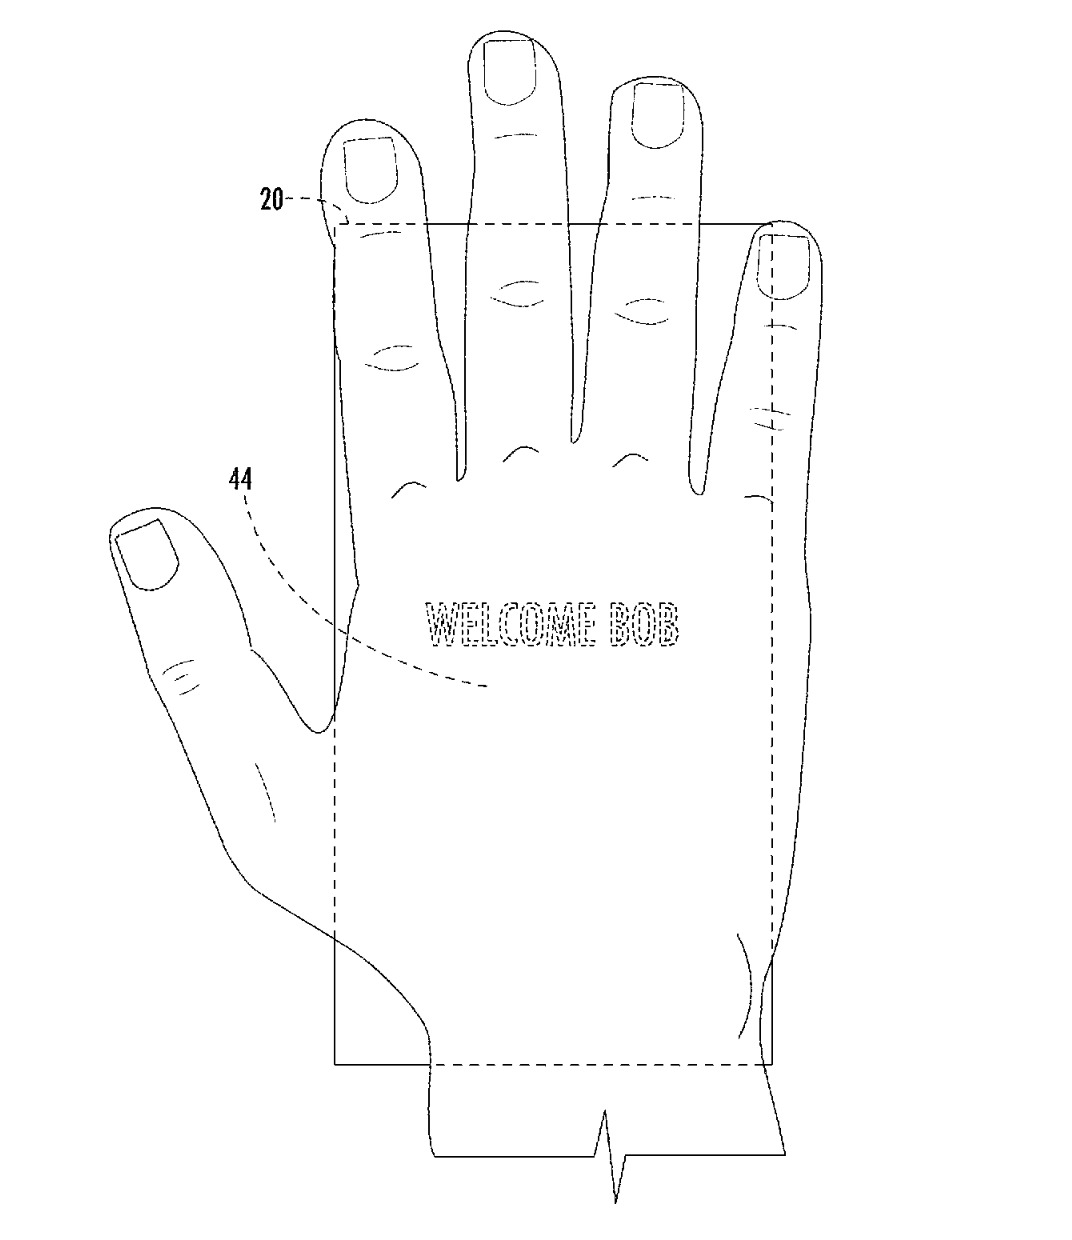 Apple's illustration showing palm identification on a device like an iPhone